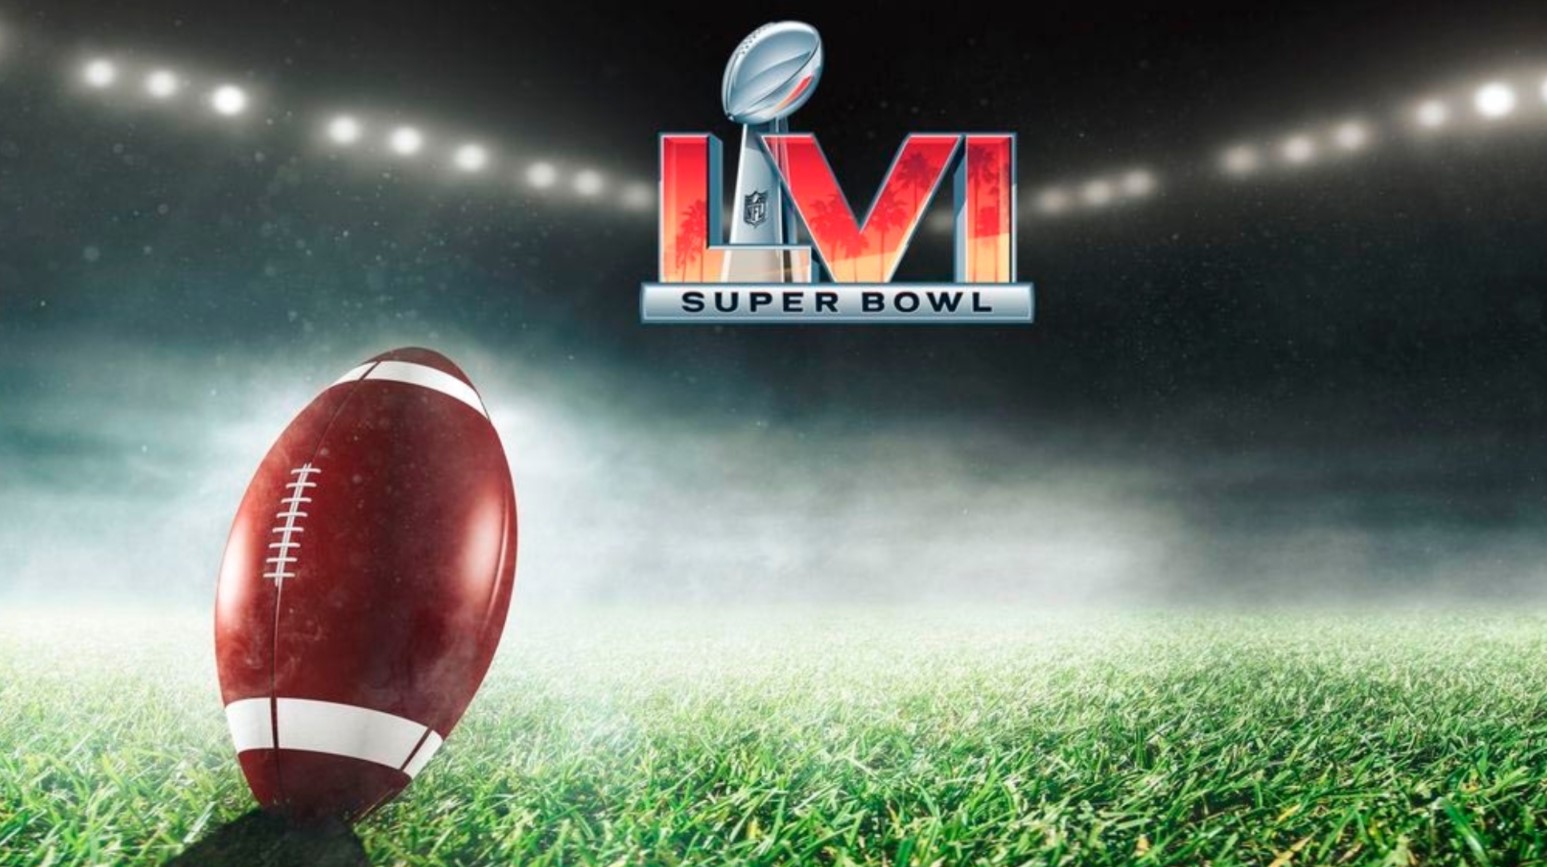 The Super Bowl LVI logo is freaking a lot of people out